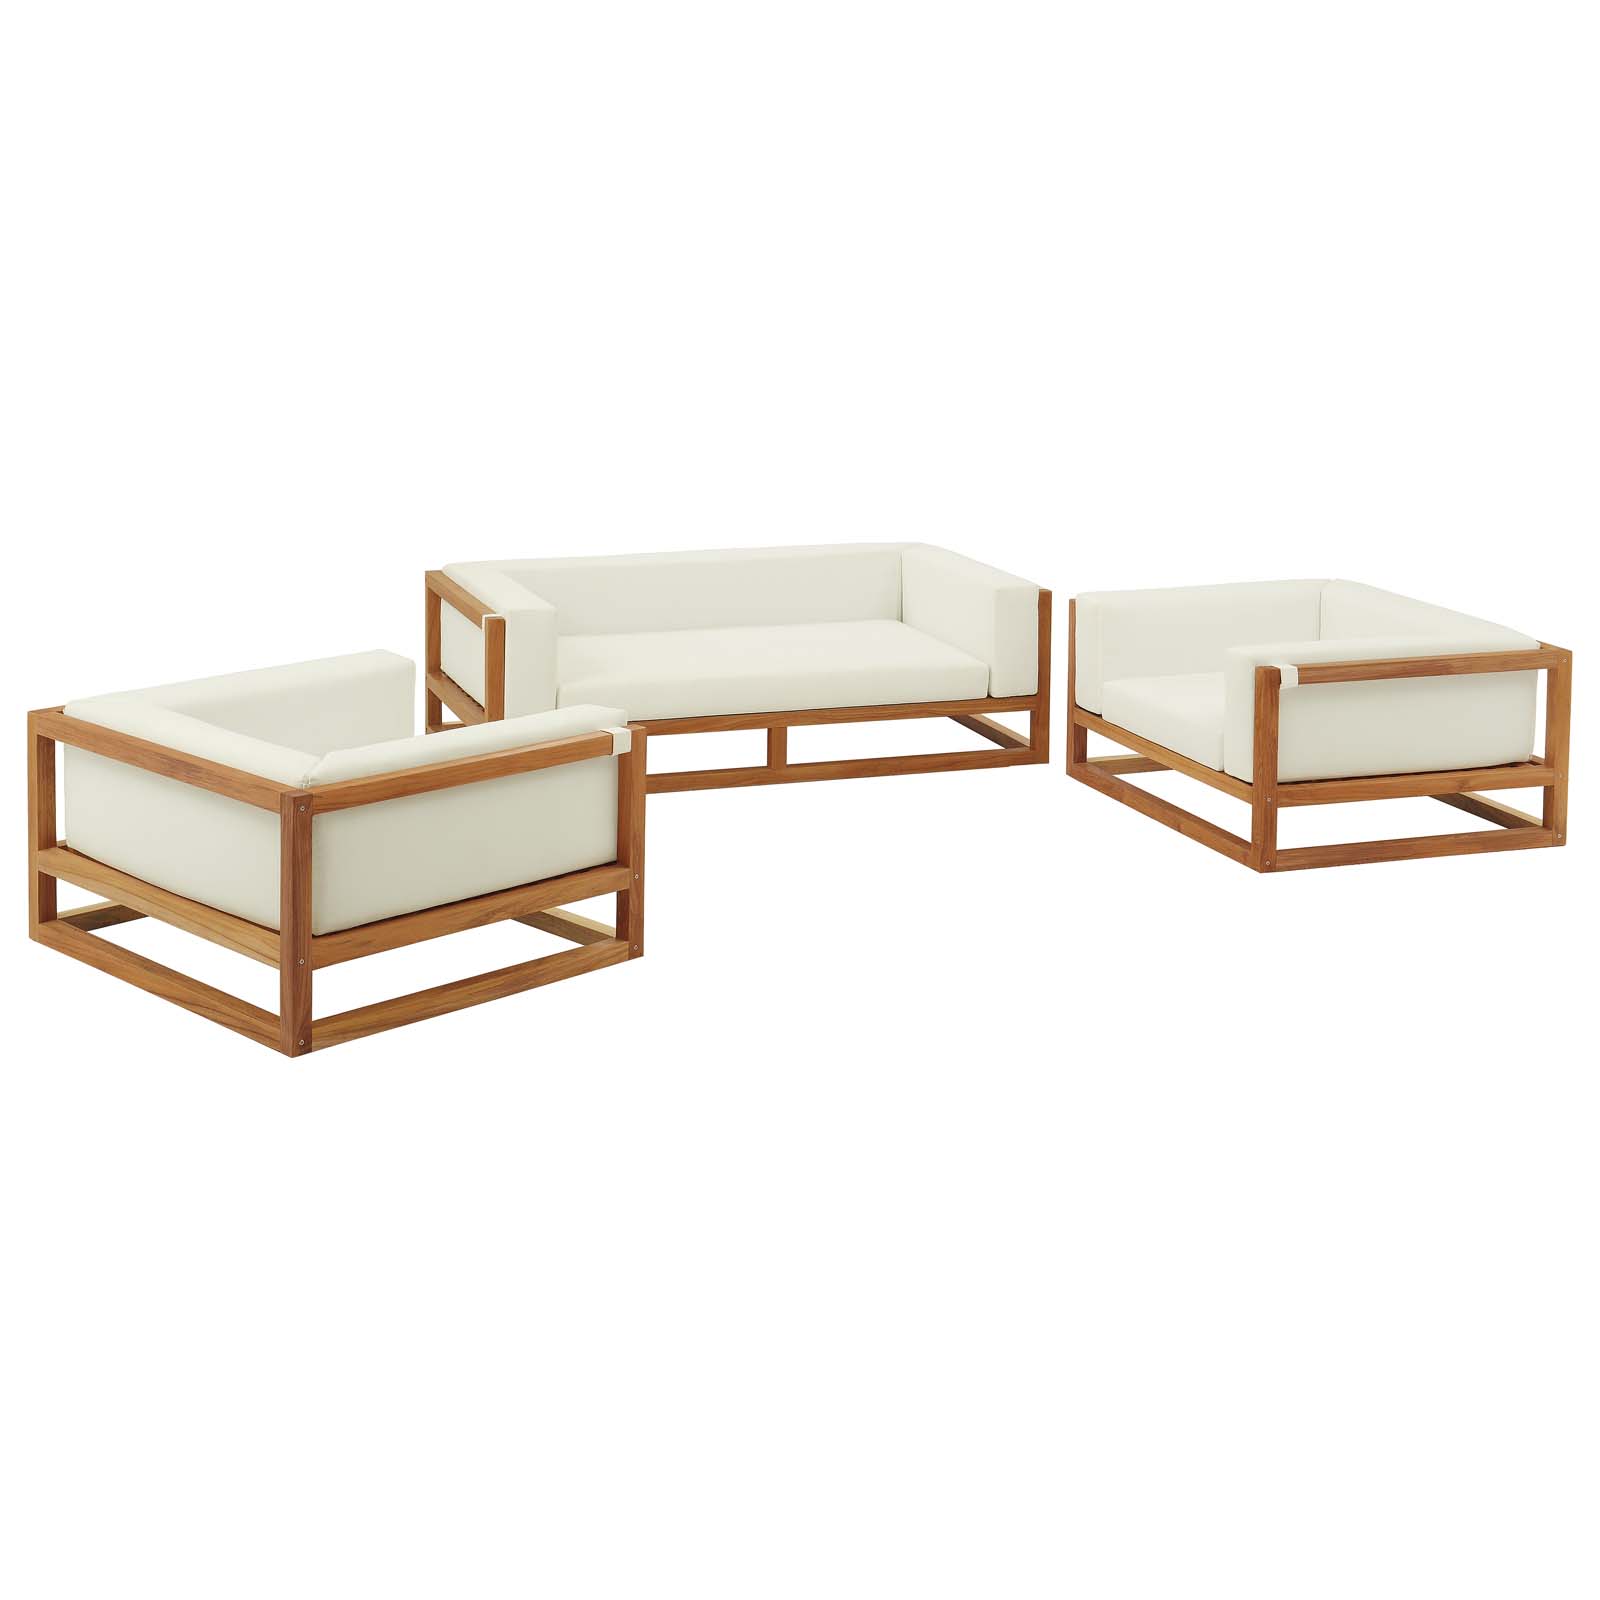 Contemporary Modern Urban Designer Outdoor Patio Balcony Garden Furniture Lounge Chair and Coffee Table Set, Wood, Natural White - image 1 of 7